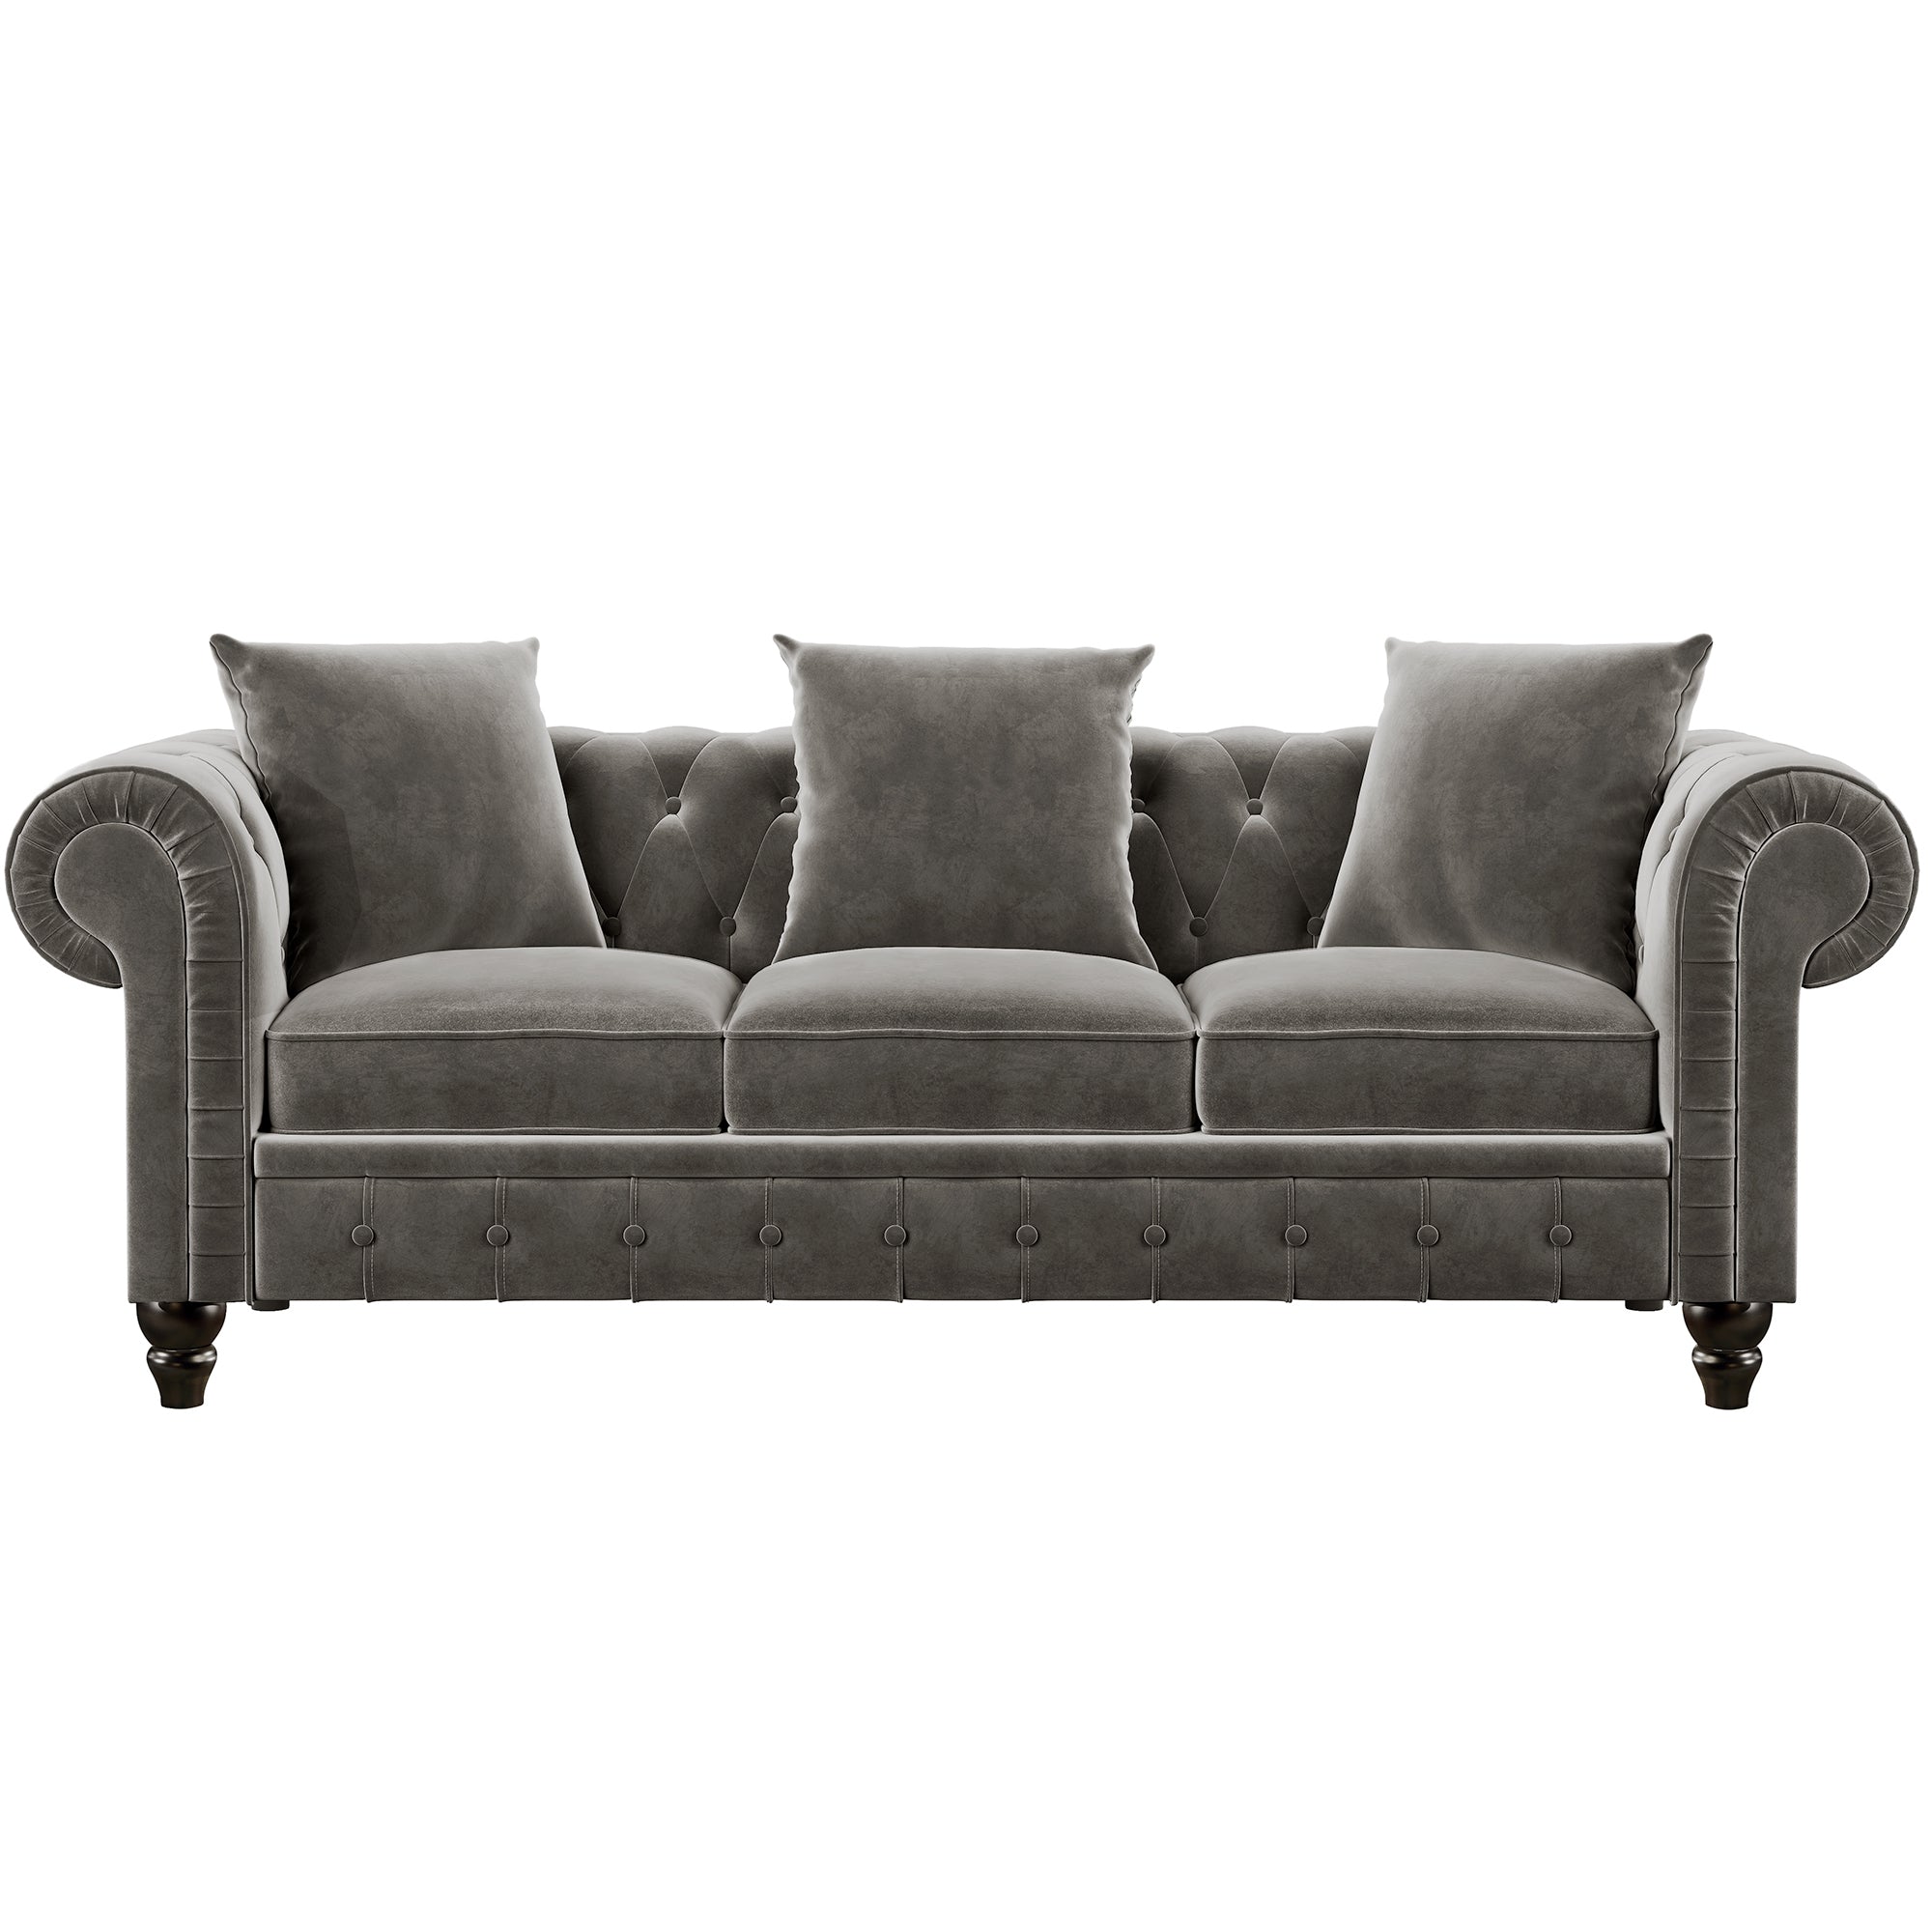 80" Chesterfield Sofa Deep Button Tufted Velvet Upholstered 3 Seat Sofa Roll Arm Classic,3 Pillows included